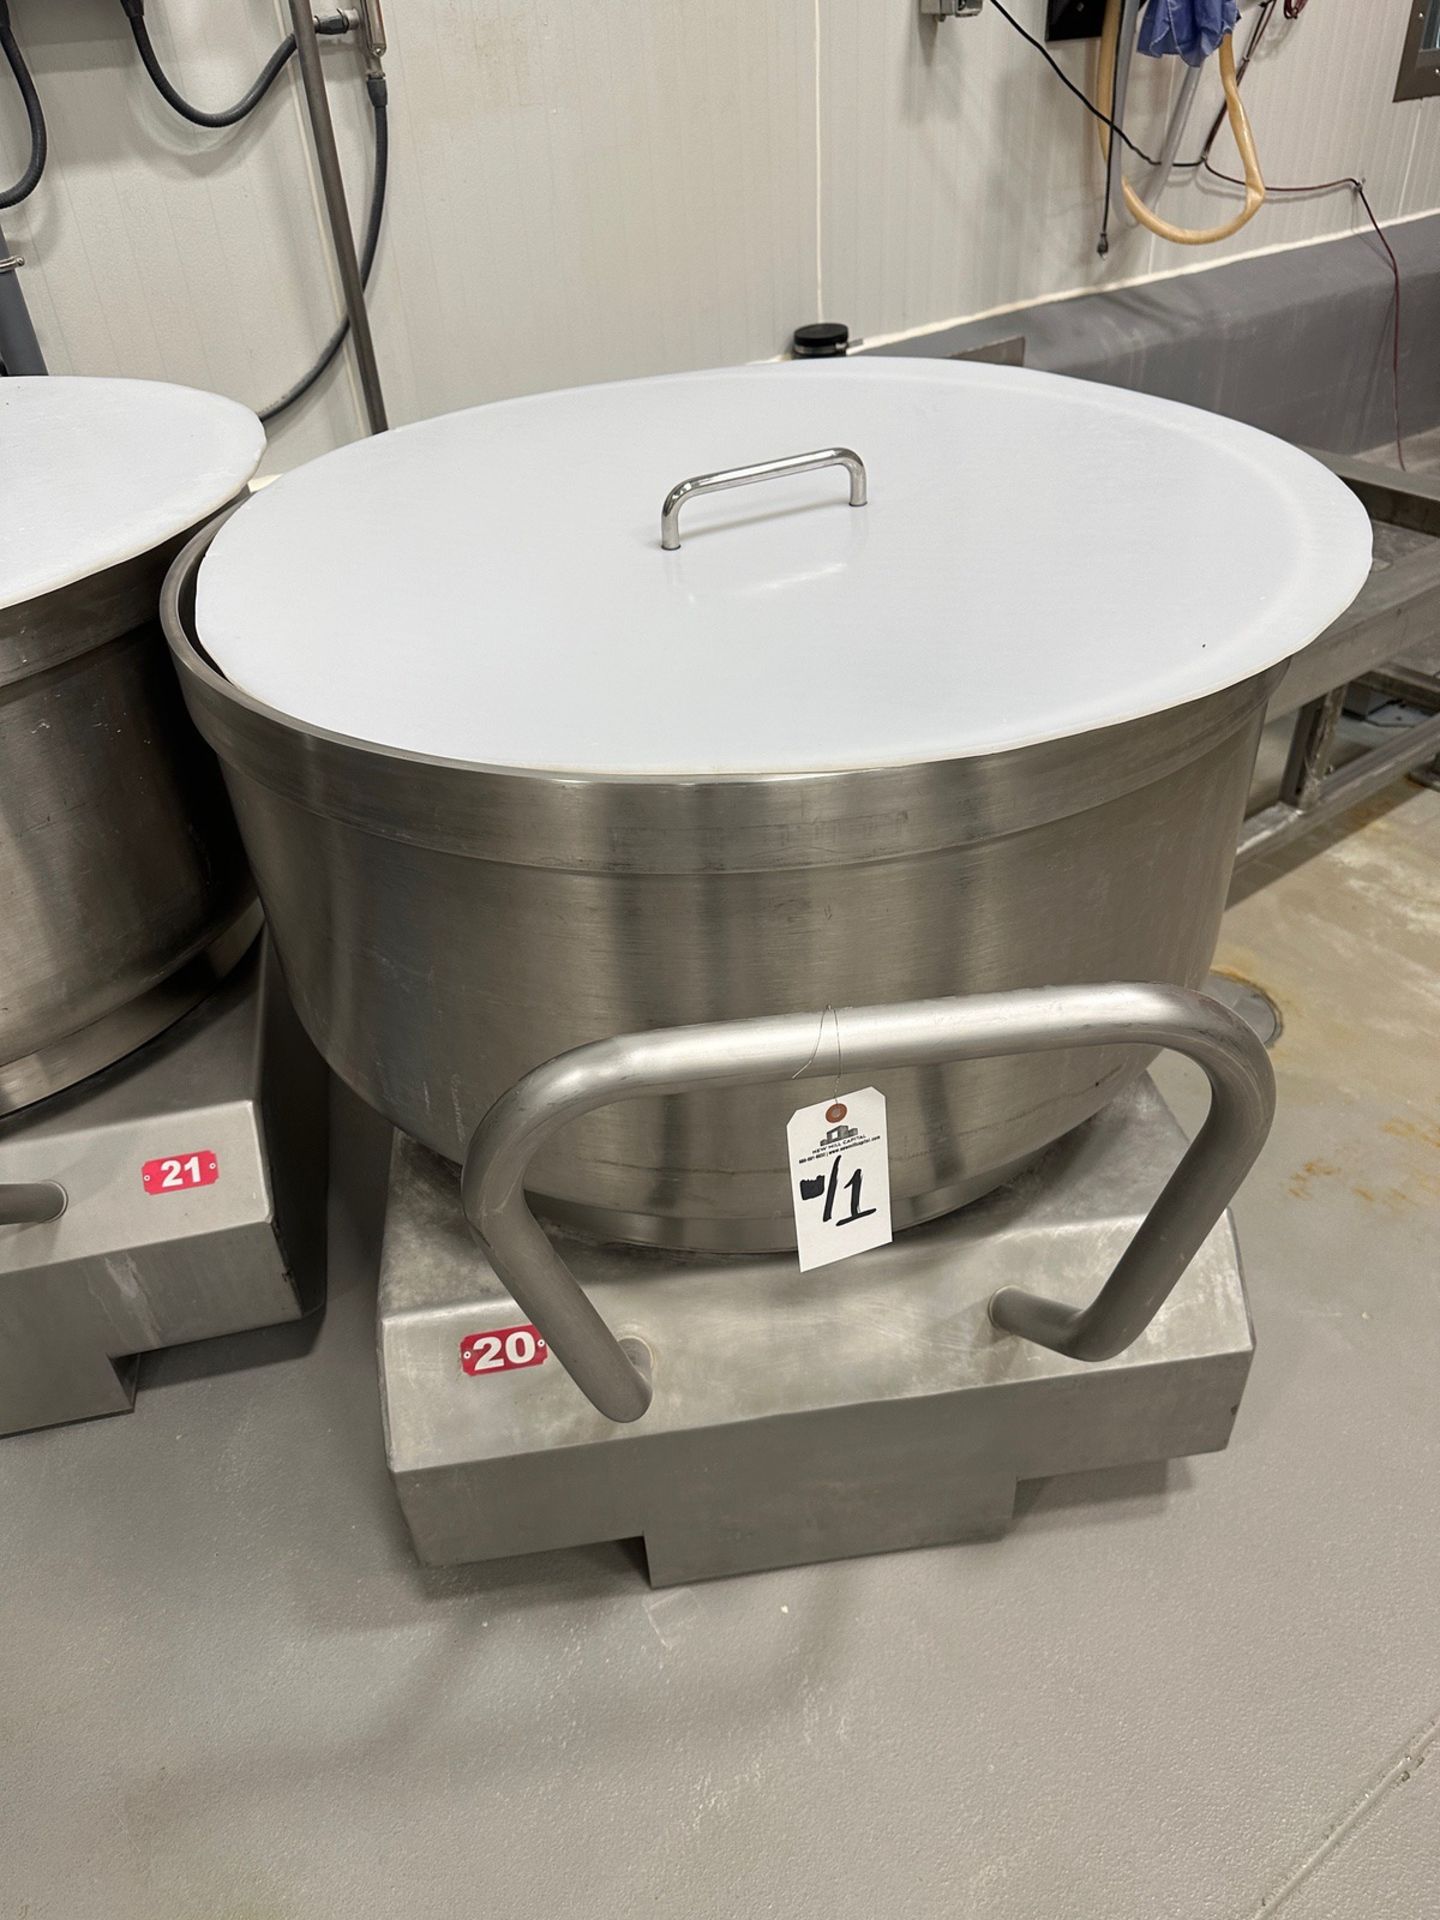 2013 Gemini Model ME 250 - 550 LB Capacity - Removable Bowl Mixer - S/N 13385 - Comes with 2 SS - Image 6 of 7